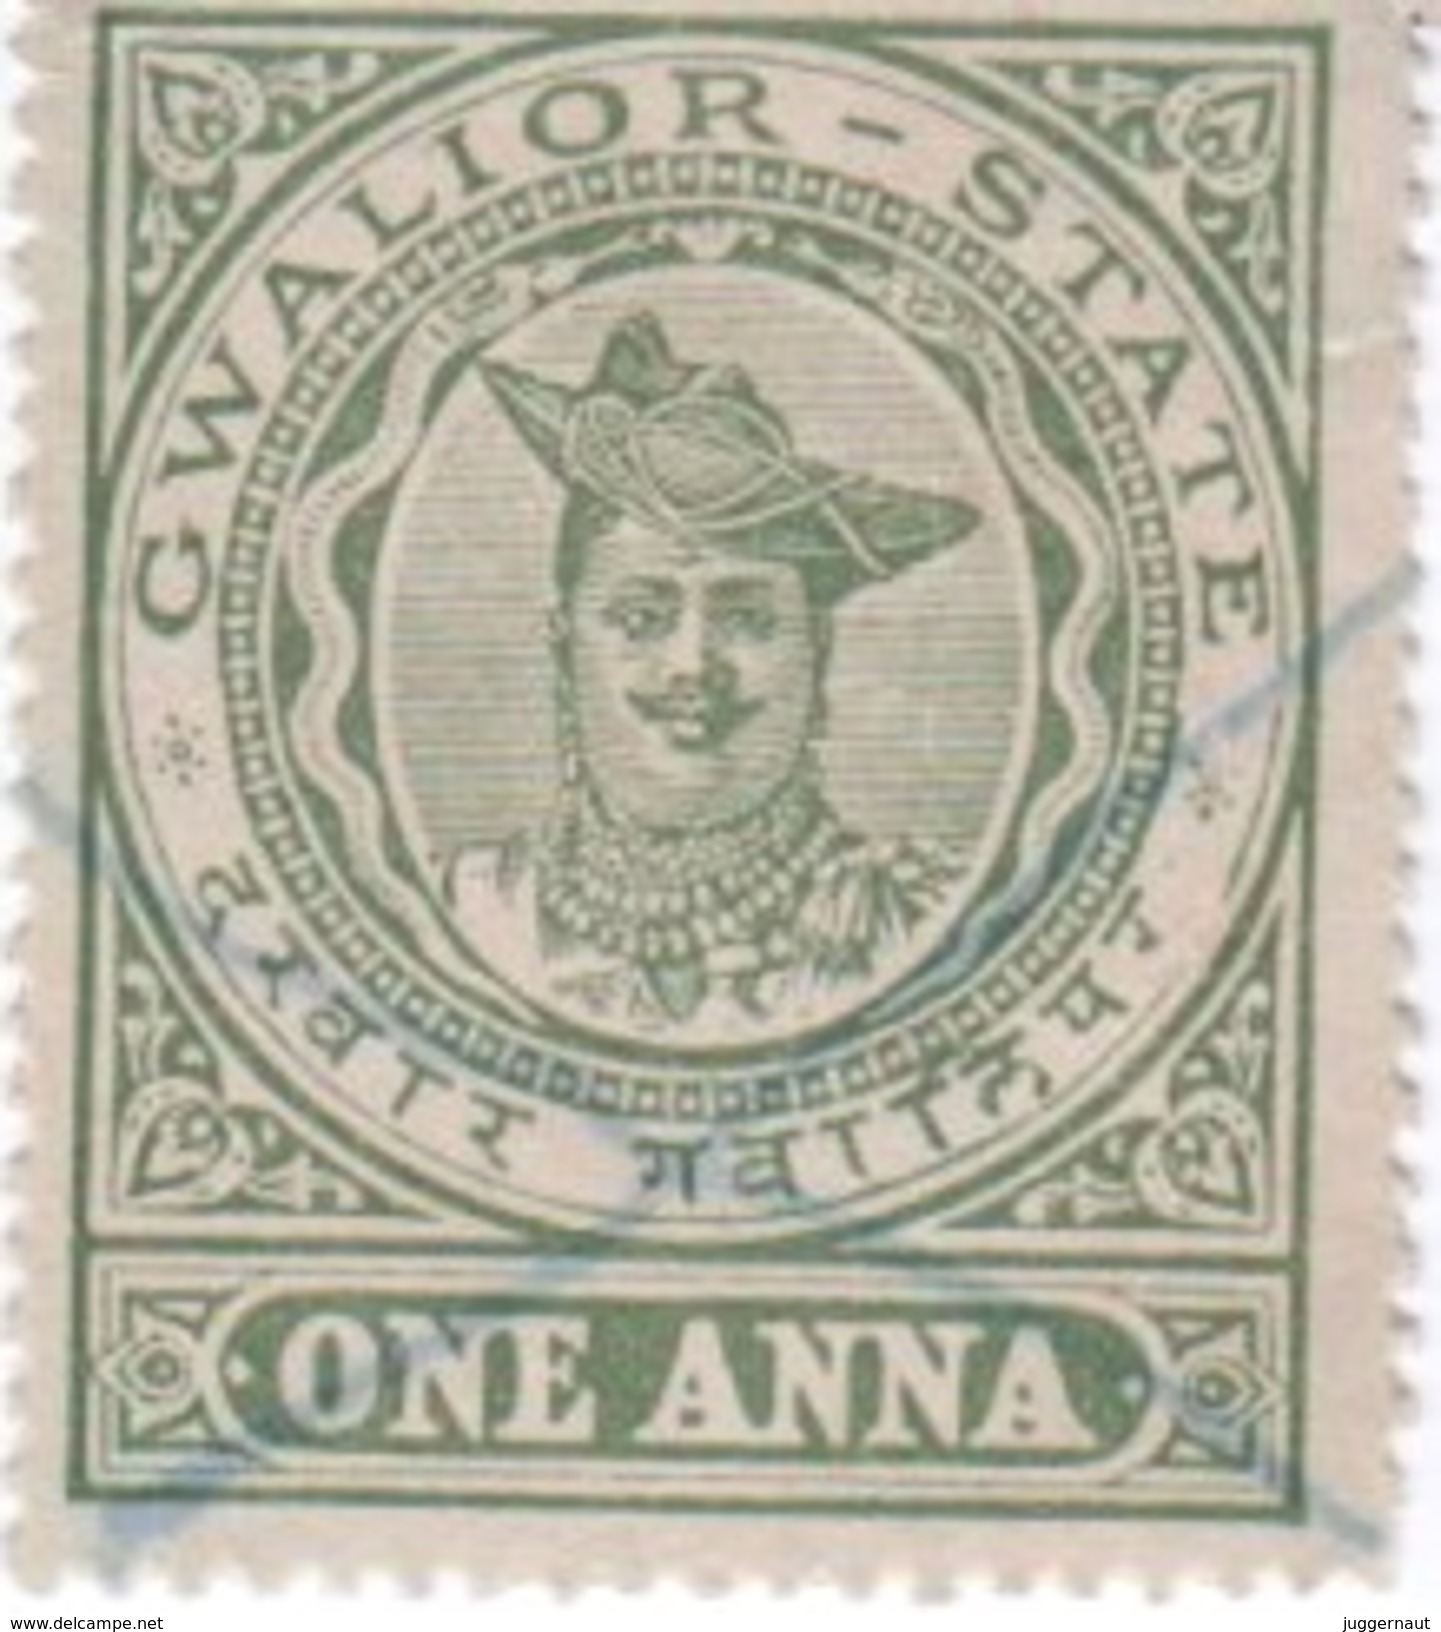 INDIA GWALIOR PRINCELY STATE 1-ANNA REVENUE STAMP 1905 GOOD/USED - Gwalior